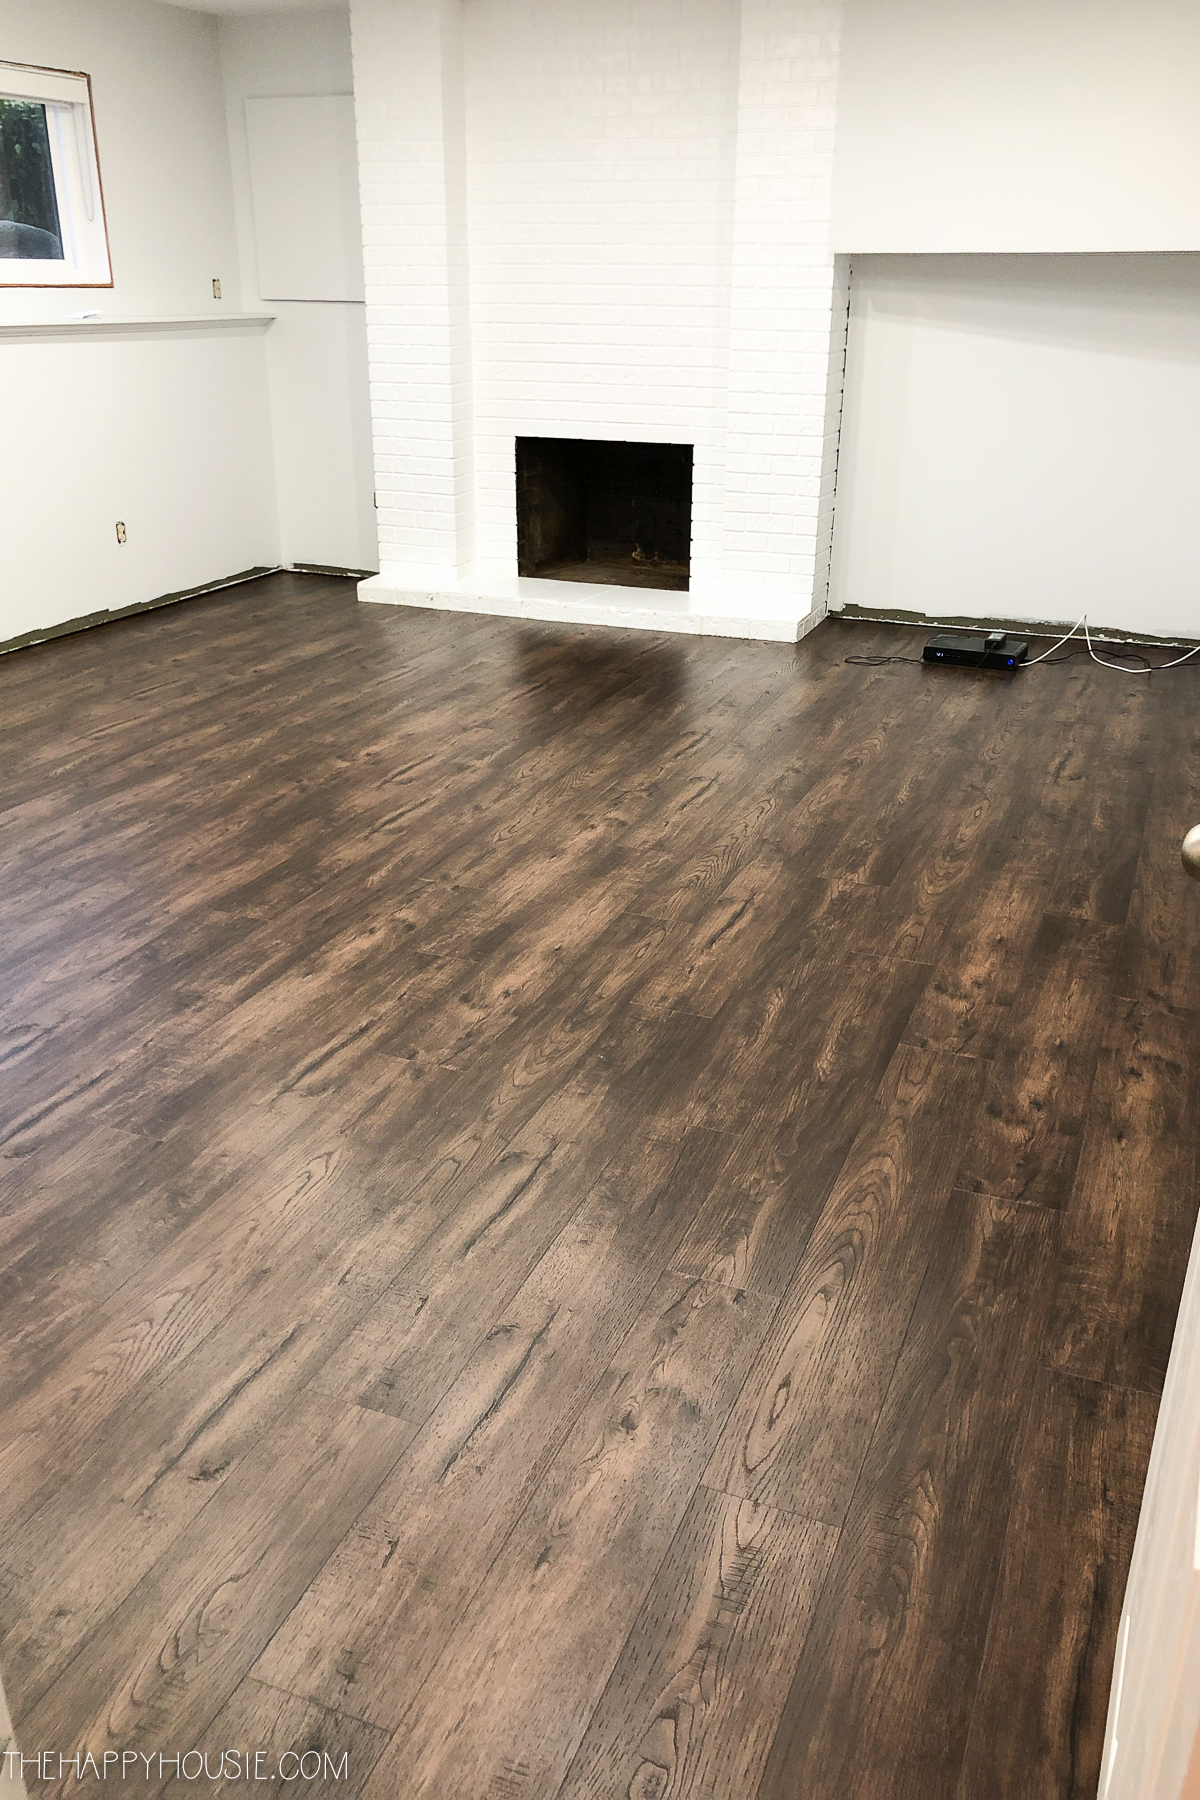 Install Vinyl Plank Over Concrete, Can Vinyl Flooring Be Used In Garage